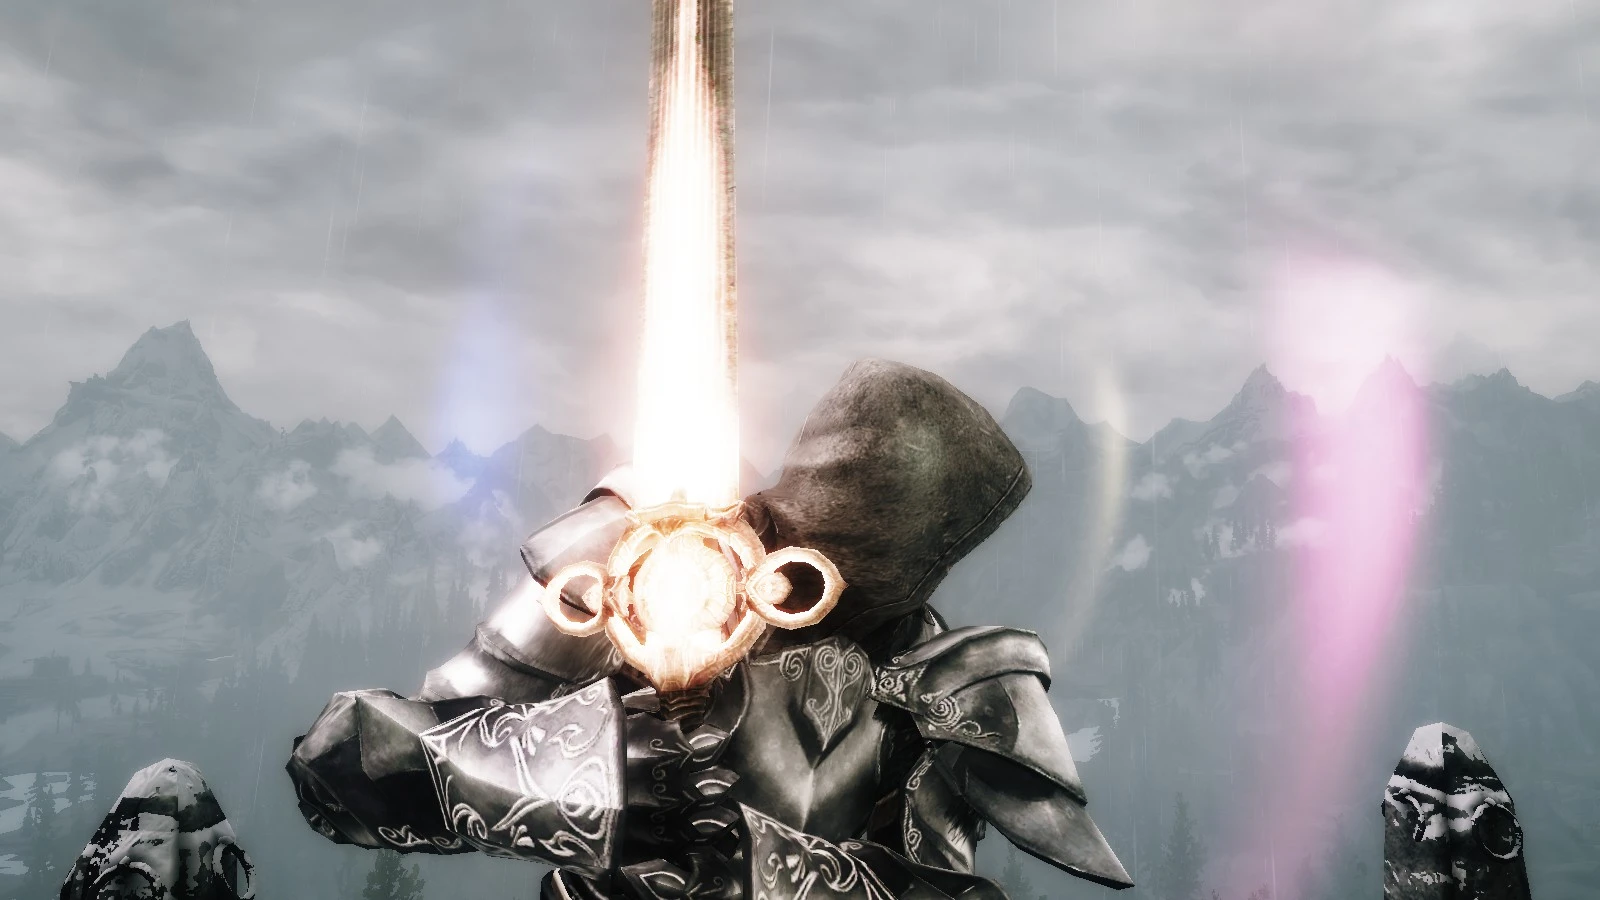 skyrim two handed weapons mods